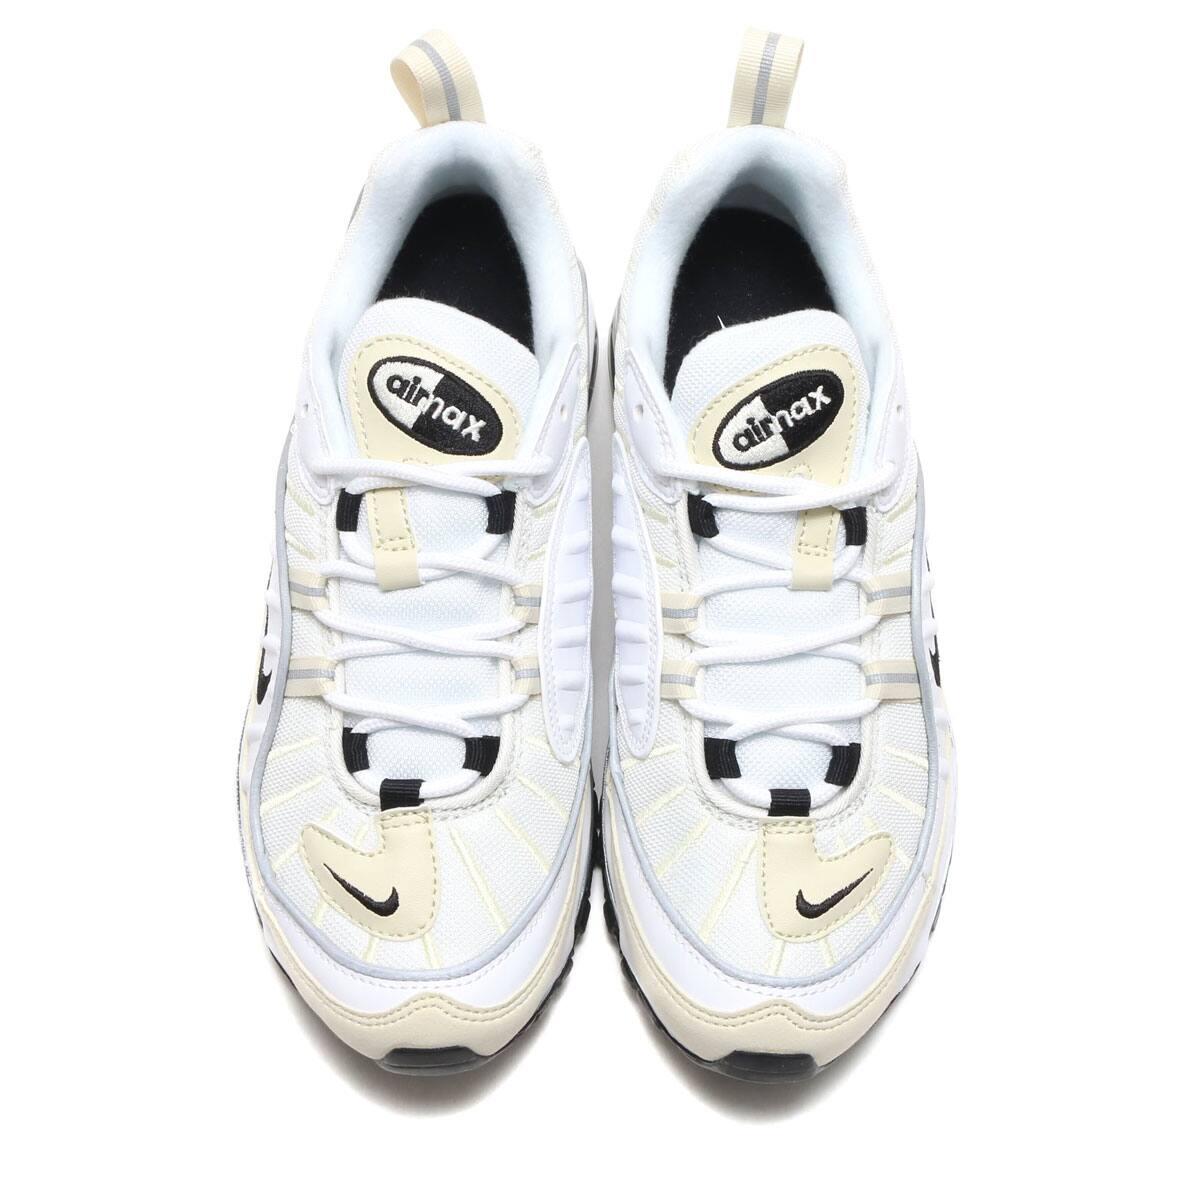 nike 98 fossil